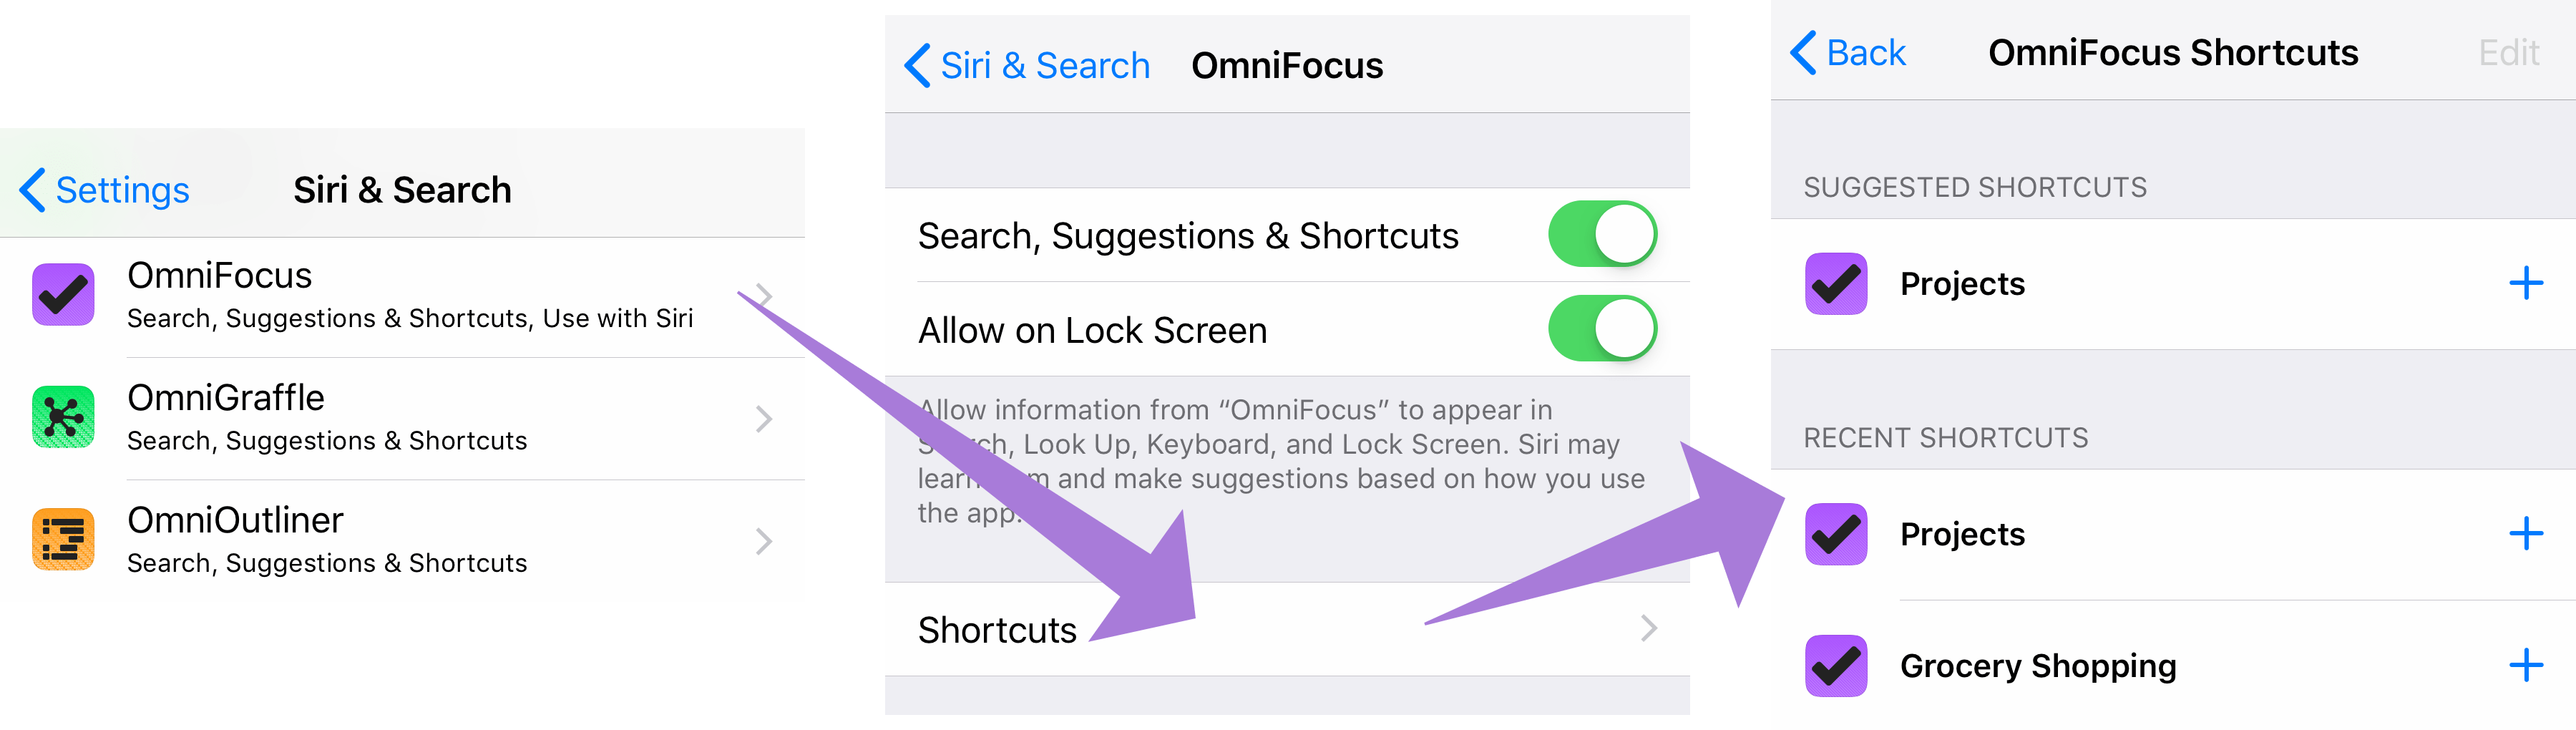 Navigating to the full list of recent OmniFocus shortcuts in iOS 12 Siri & Search settings